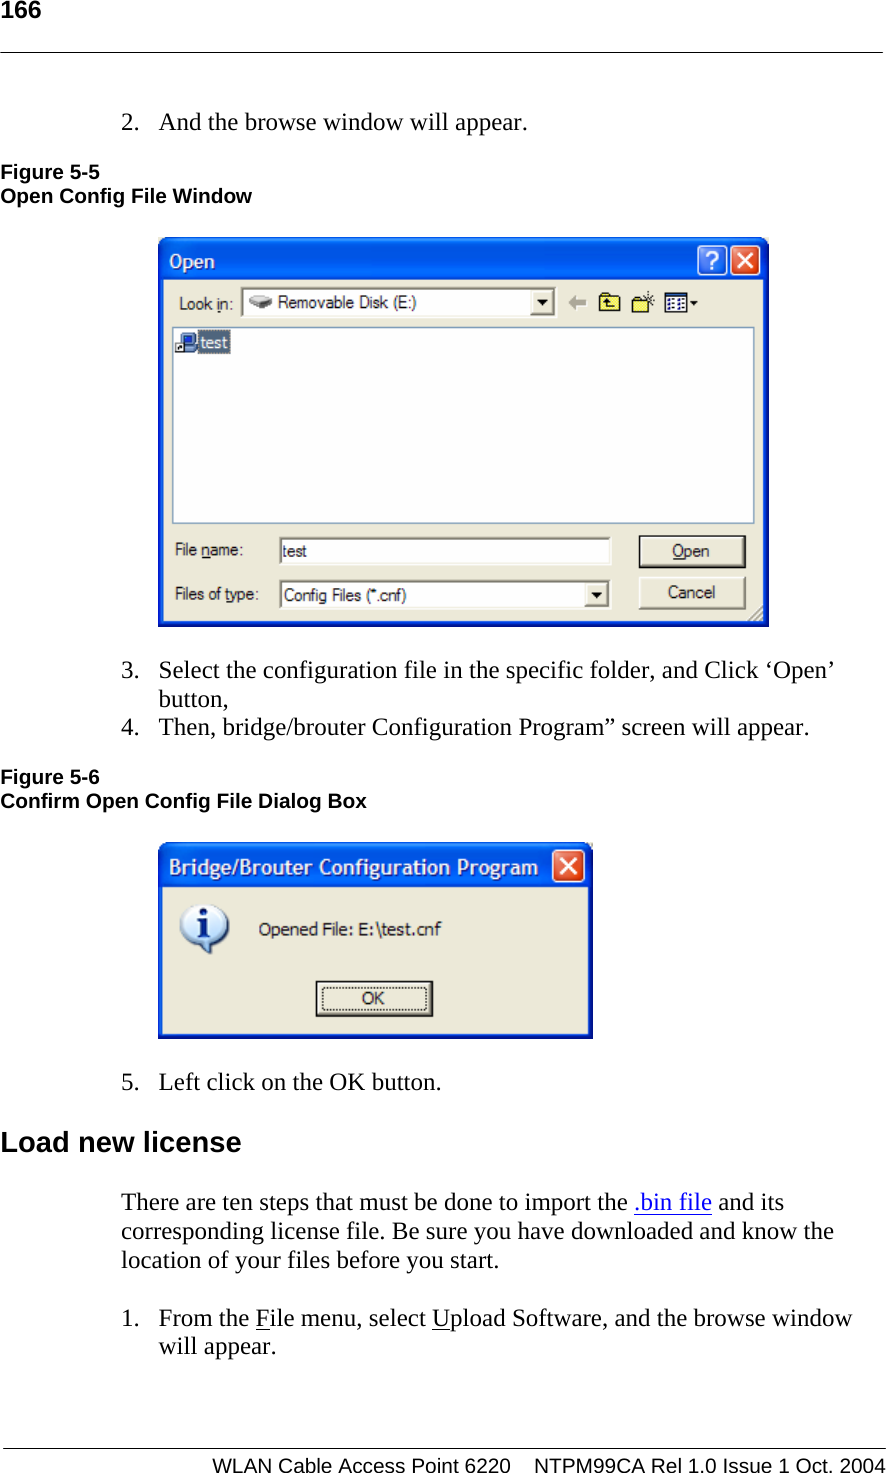   166    2. And the browse window will appear.  Figure 5-5 Open Config File Window    3. Select the configuration file in the specific folder, and Click ‘Open’ button, 4. Then, bridge/brouter Configuration Program” screen will appear.  Figure 5-6 Confirm Open Config File Dialog Box    5. Left click on the OK button.  Load new license There are ten steps that must be done to import the .bin file and its corresponding license file. Be sure you have downloaded and know the location of your files before you start. 1. From the File menu, select Upload Software, and the browse window will appear. WLAN Cable Access Point 6220    NTPM99CA Rel 1.0 Issue 1 Oct. 2004